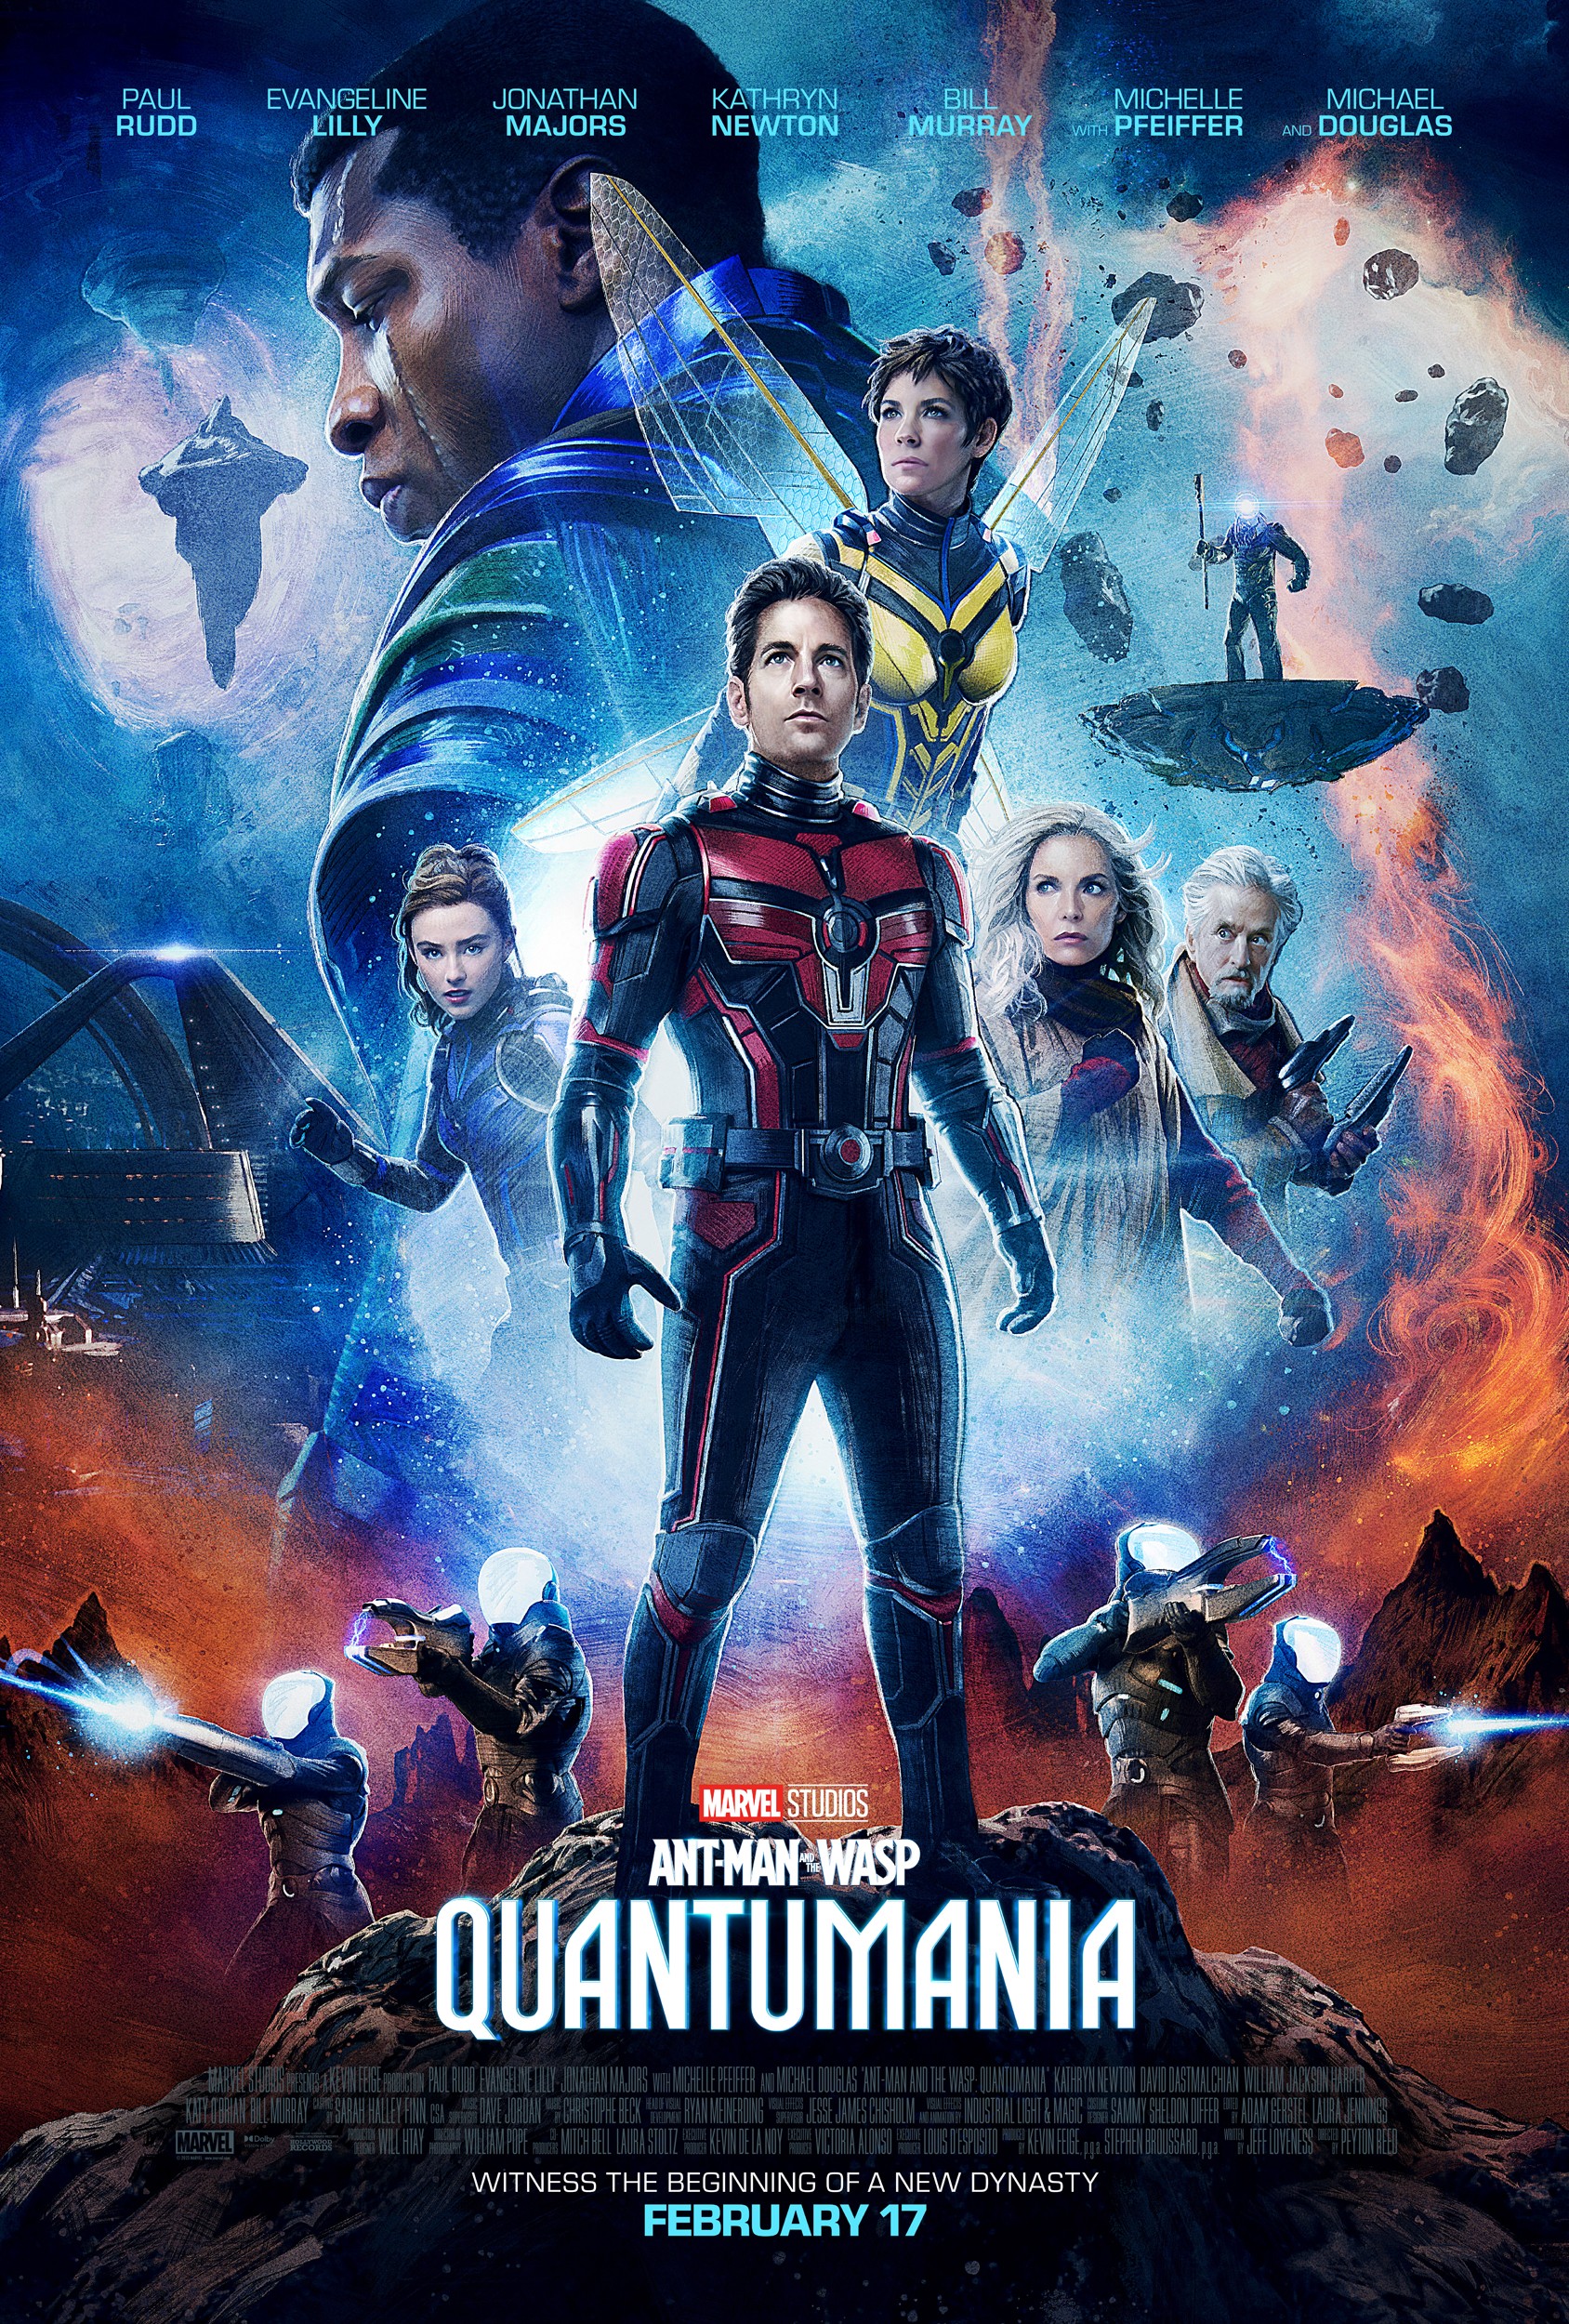 Ant-Man and the Wasp: Quantumania has a lower Rotten Tomatoes